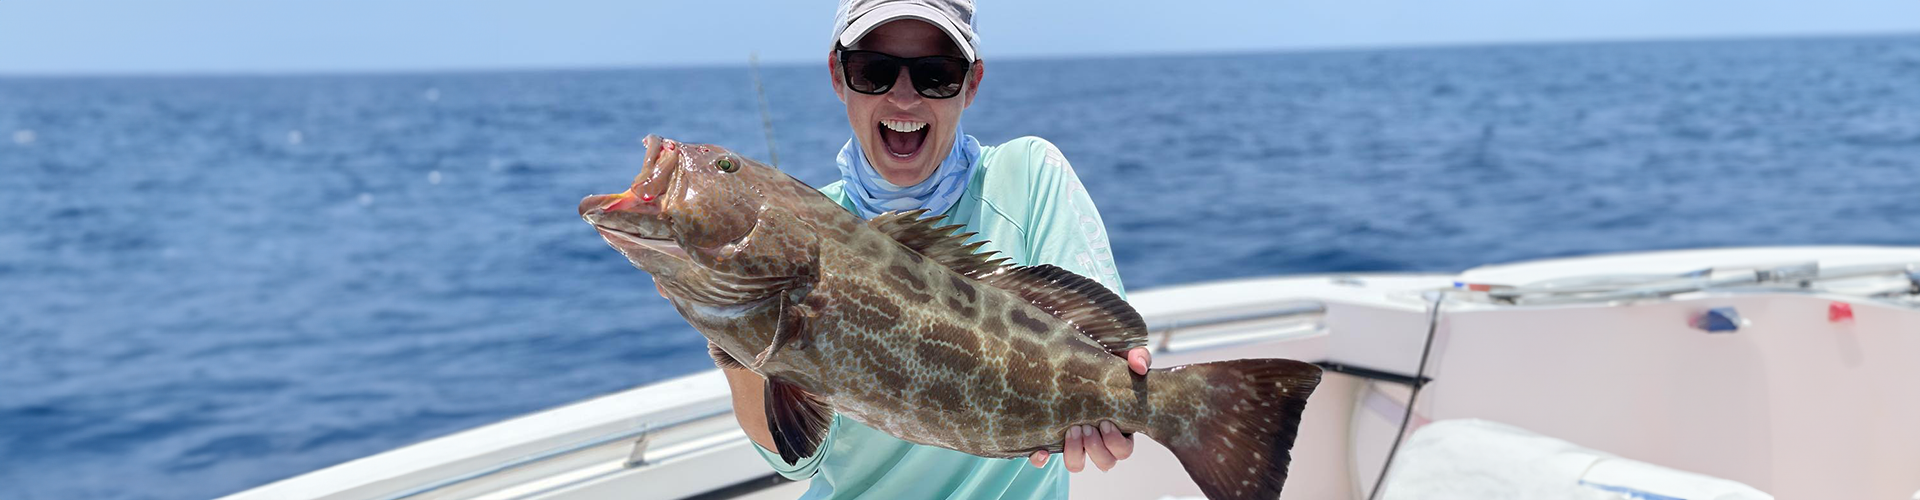 Woman catching grouper on a Key West offshore fishing charter